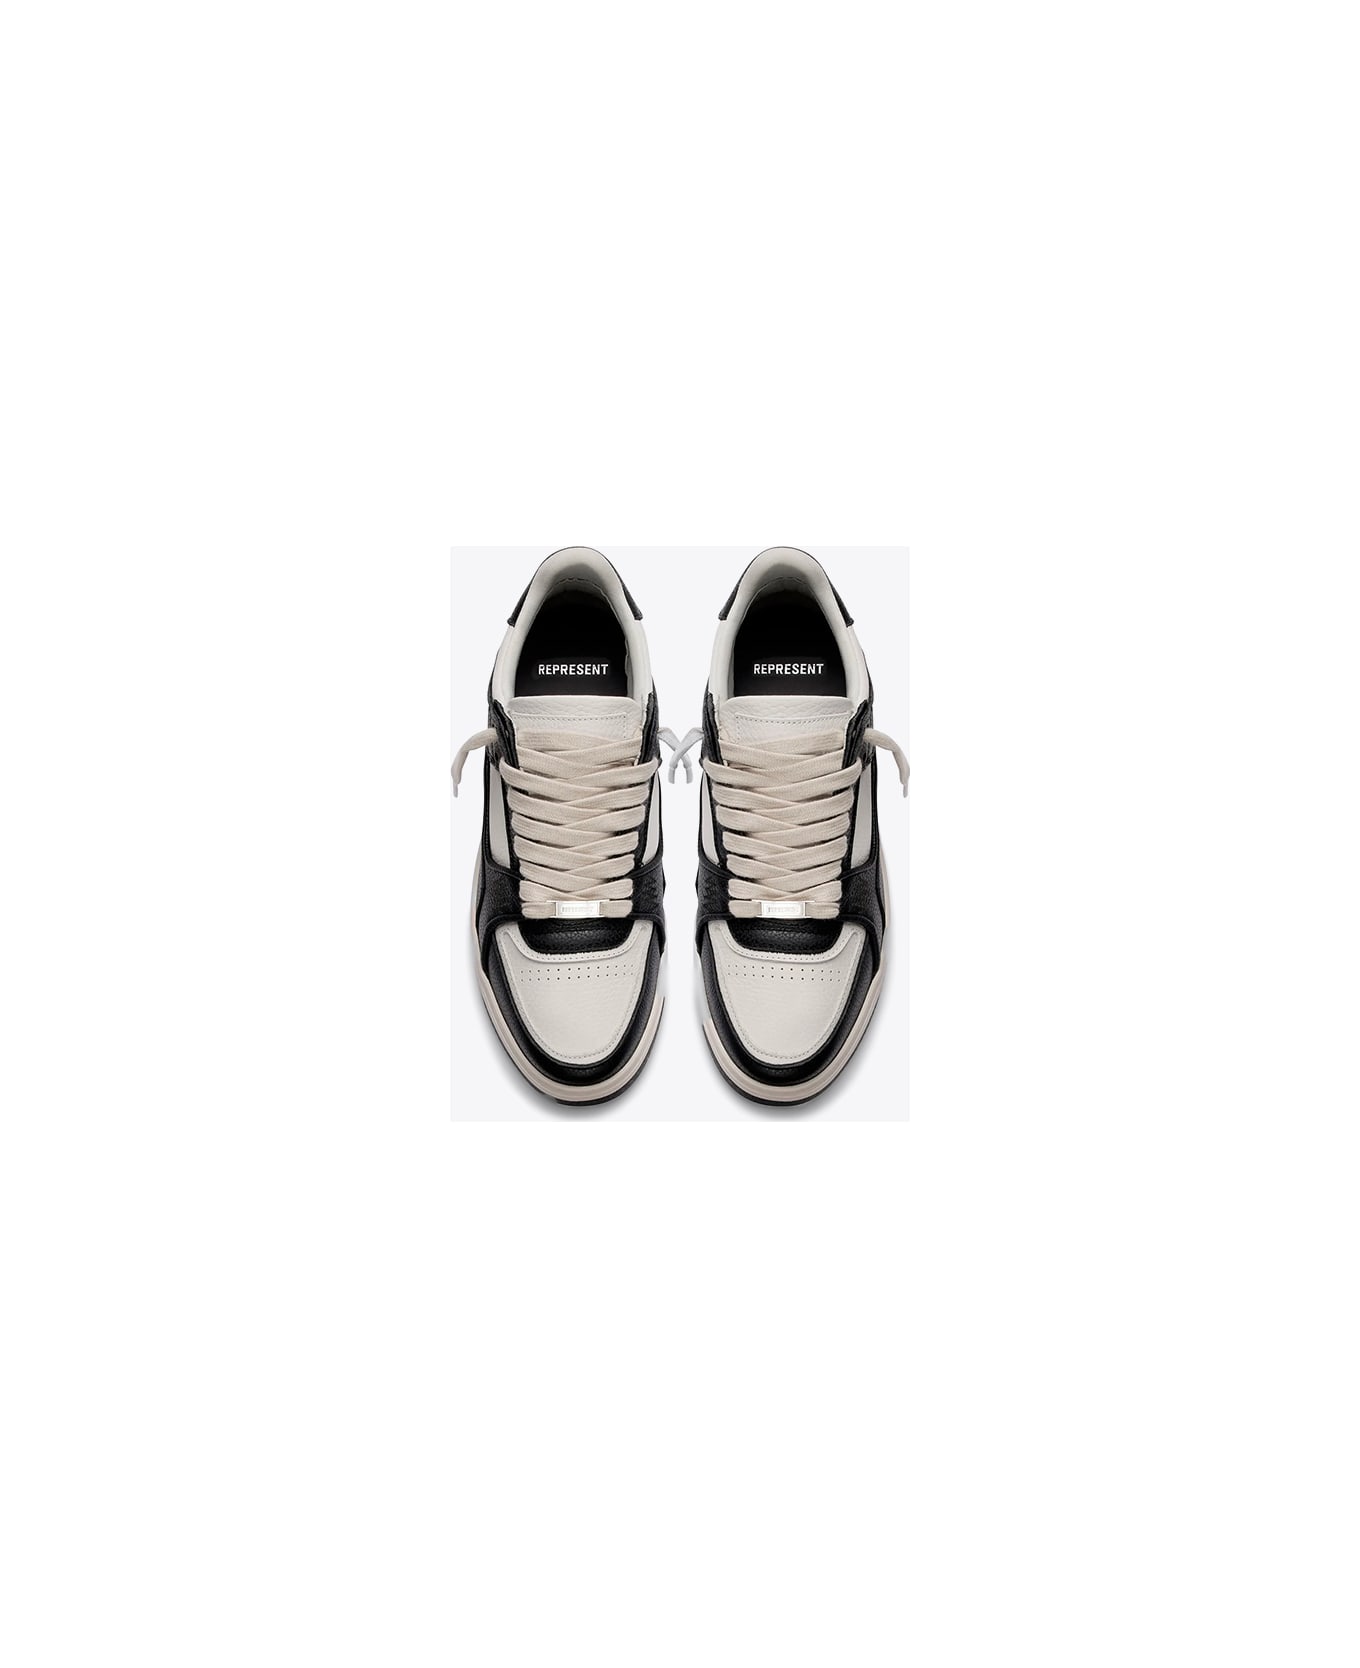 REPRESENT Apex Off White And Black Leather Low Top Sneaker - Apex - Black